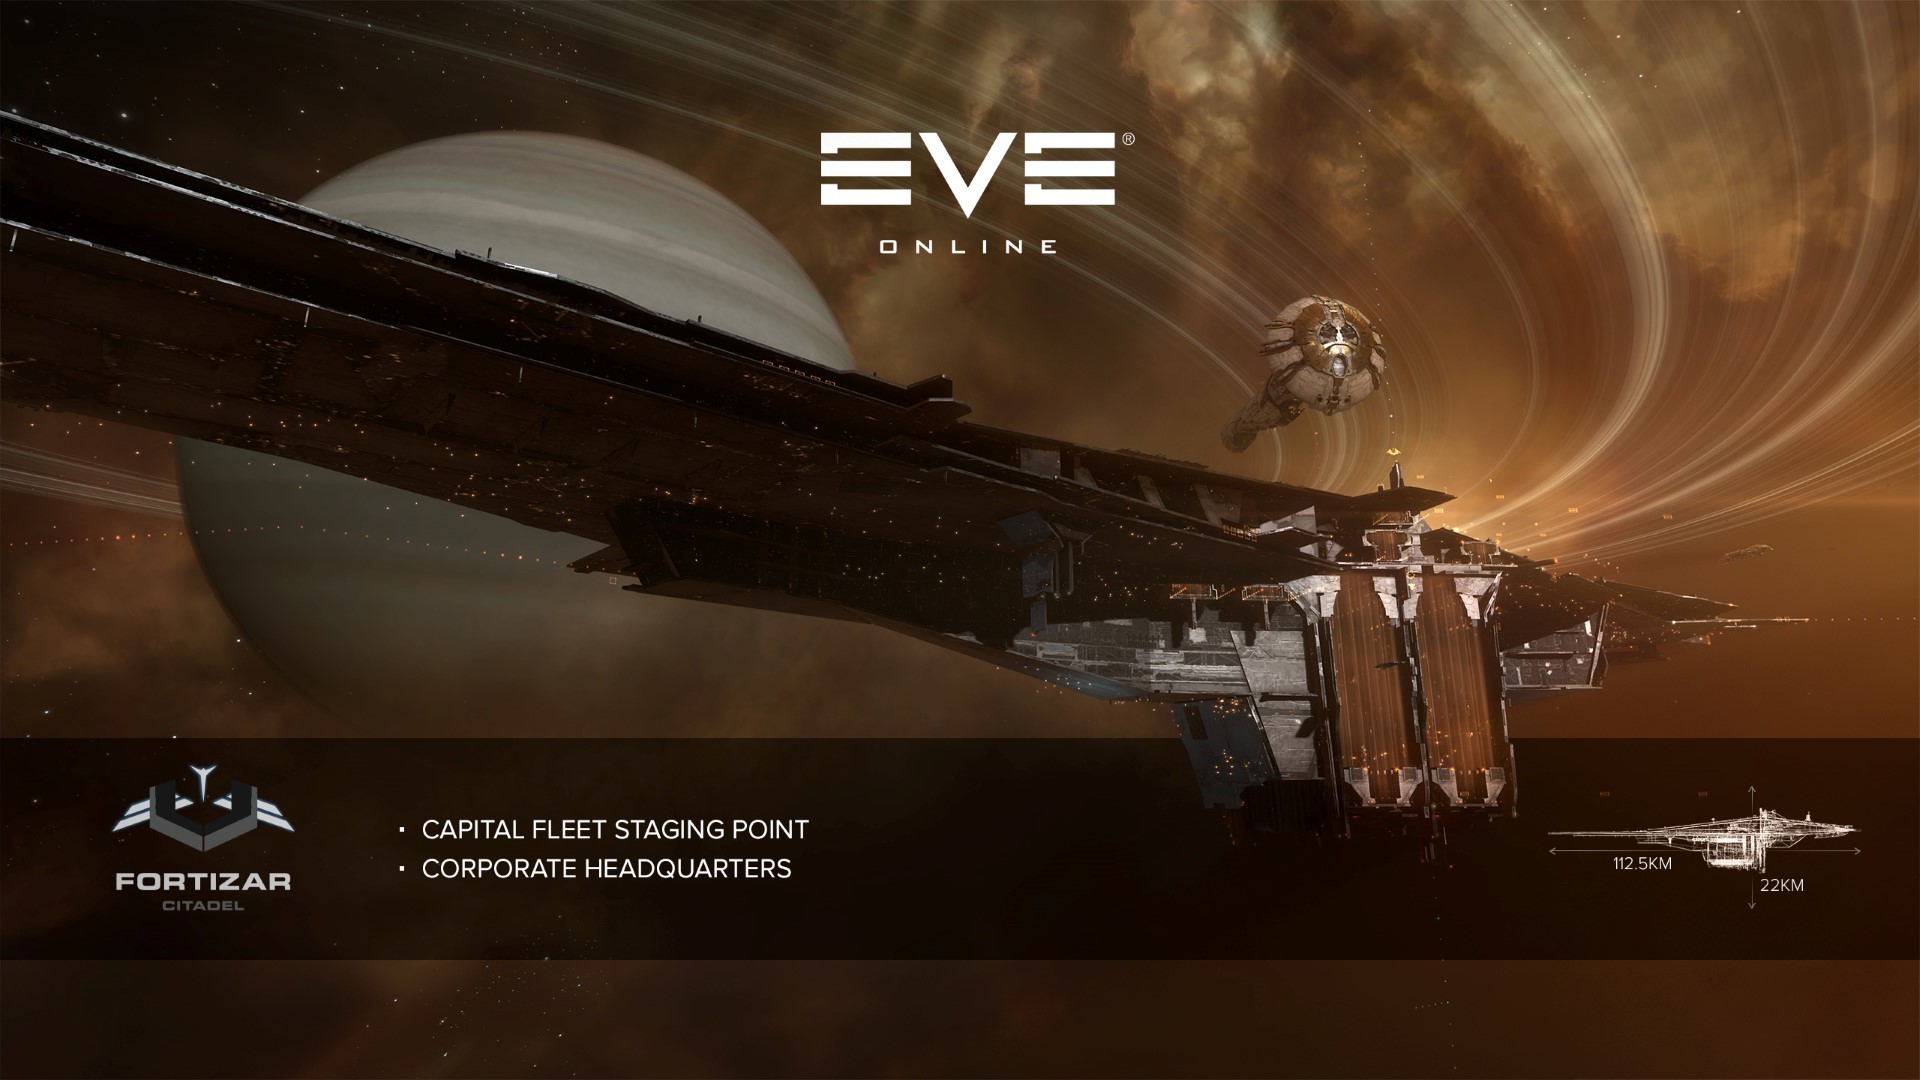 March Release Events December Release Events Eve Online Images, Photos, Reviews